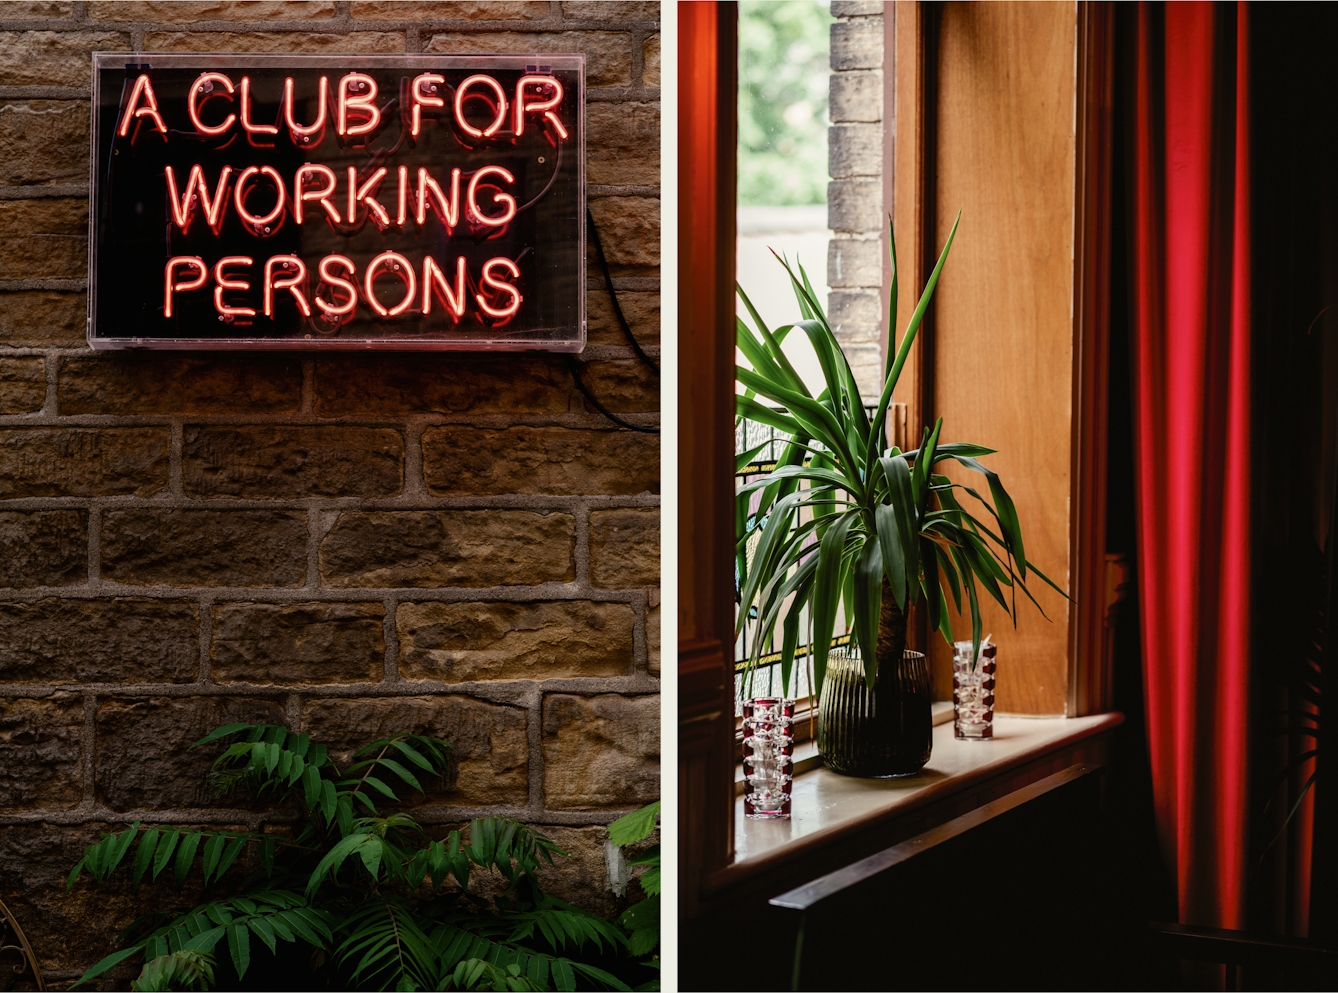 Photographic diptych made up of two portrait orientation images. The image on the left shows a bare brick interior wall on which a red neon sign has been hung. The sign reads, "A club for working persons". At the bottom of the image the tops a several green plants can be seen. The image on the right shows a window alcove from a horizontal angle. Framing the window is a long red curtain. Sitting on the window sill is a large green leafed house plant in a glass ribbed pot. Either side of the pot are two small glass vases, made up of an intricate moulding.